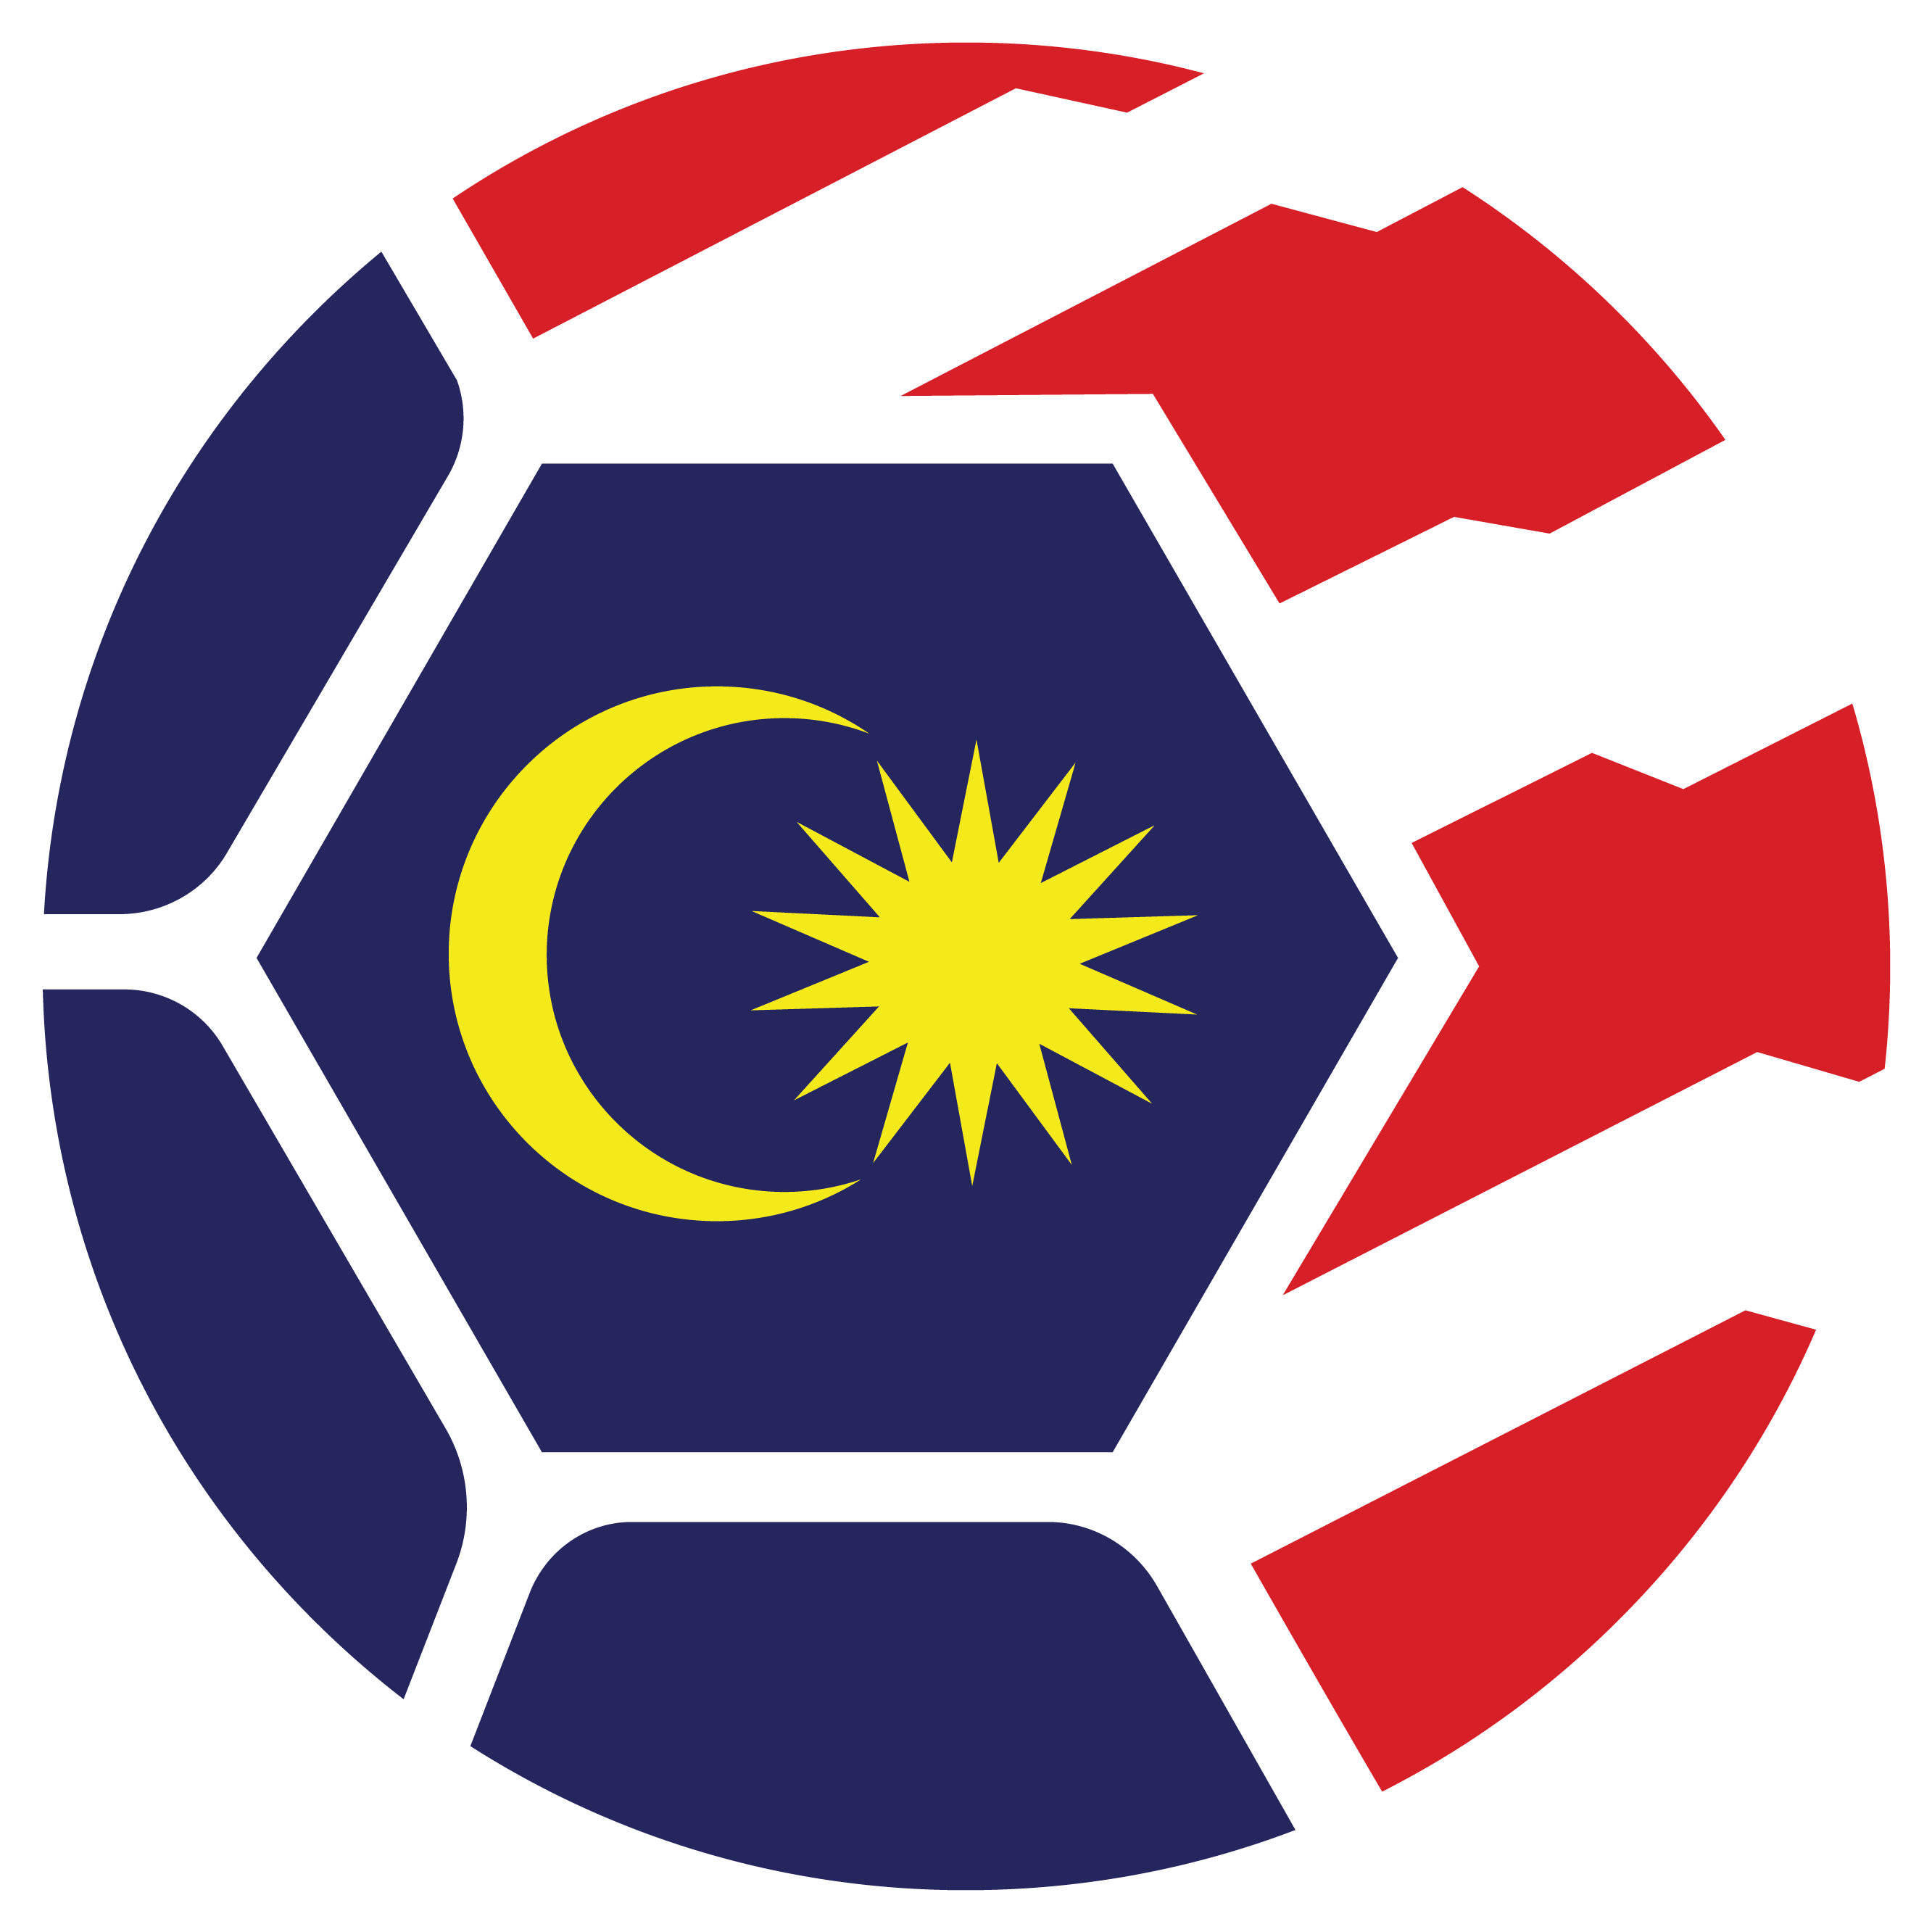 A Red White And Blue Football Ball With A Yellow Crescent And A Star